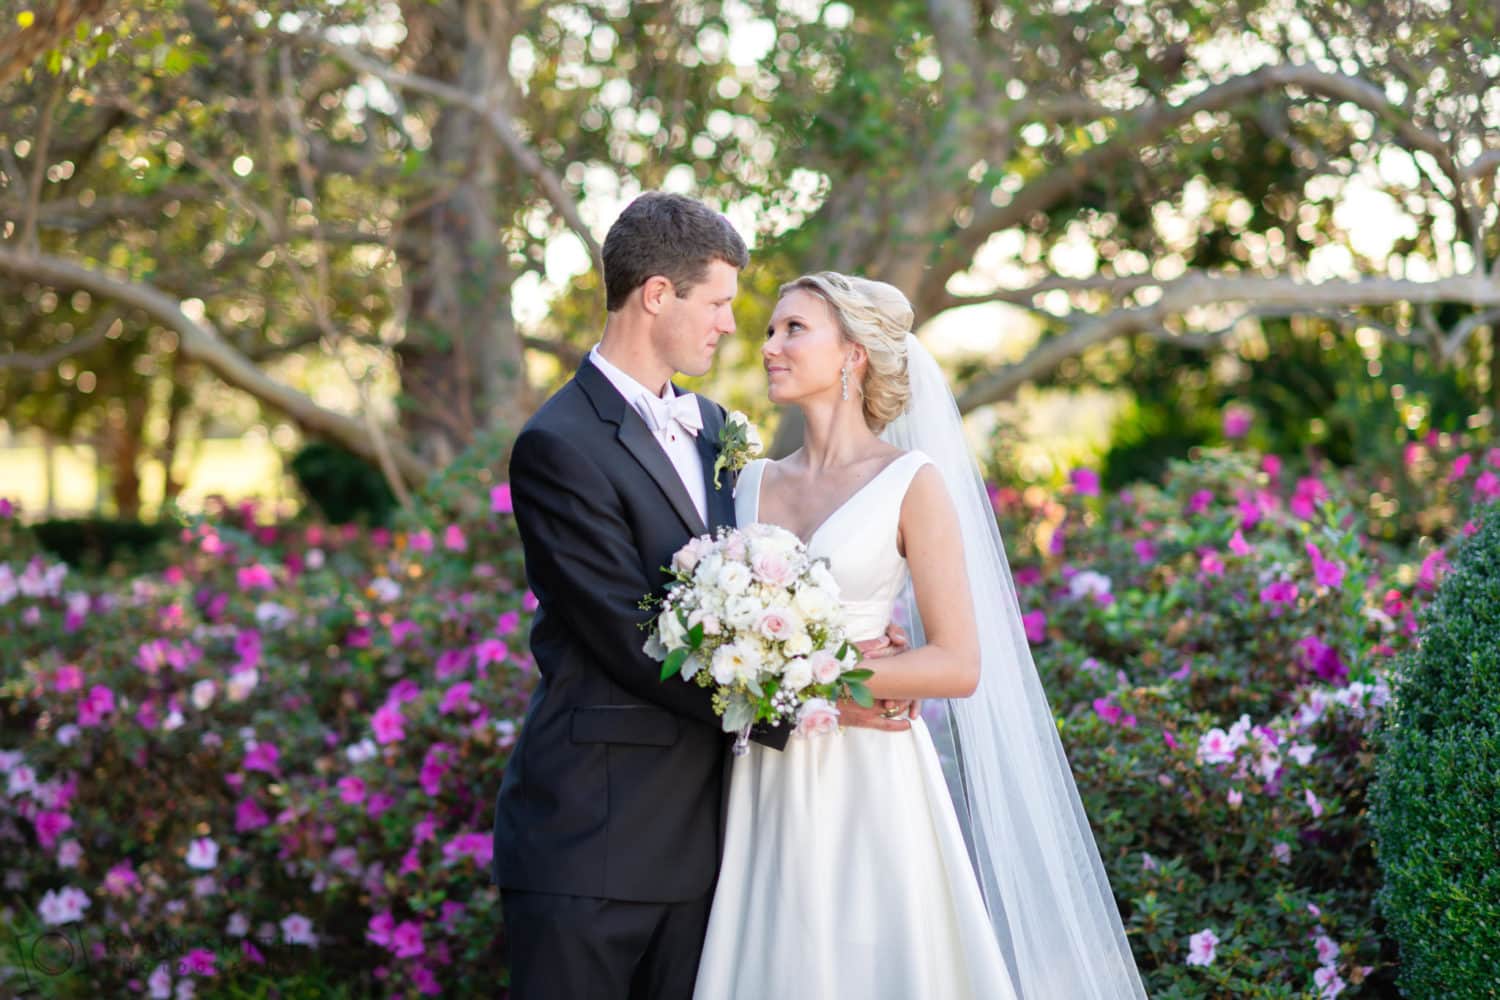 Looking into each others eyes in front of the garden trees - Pine Lakes Country Club